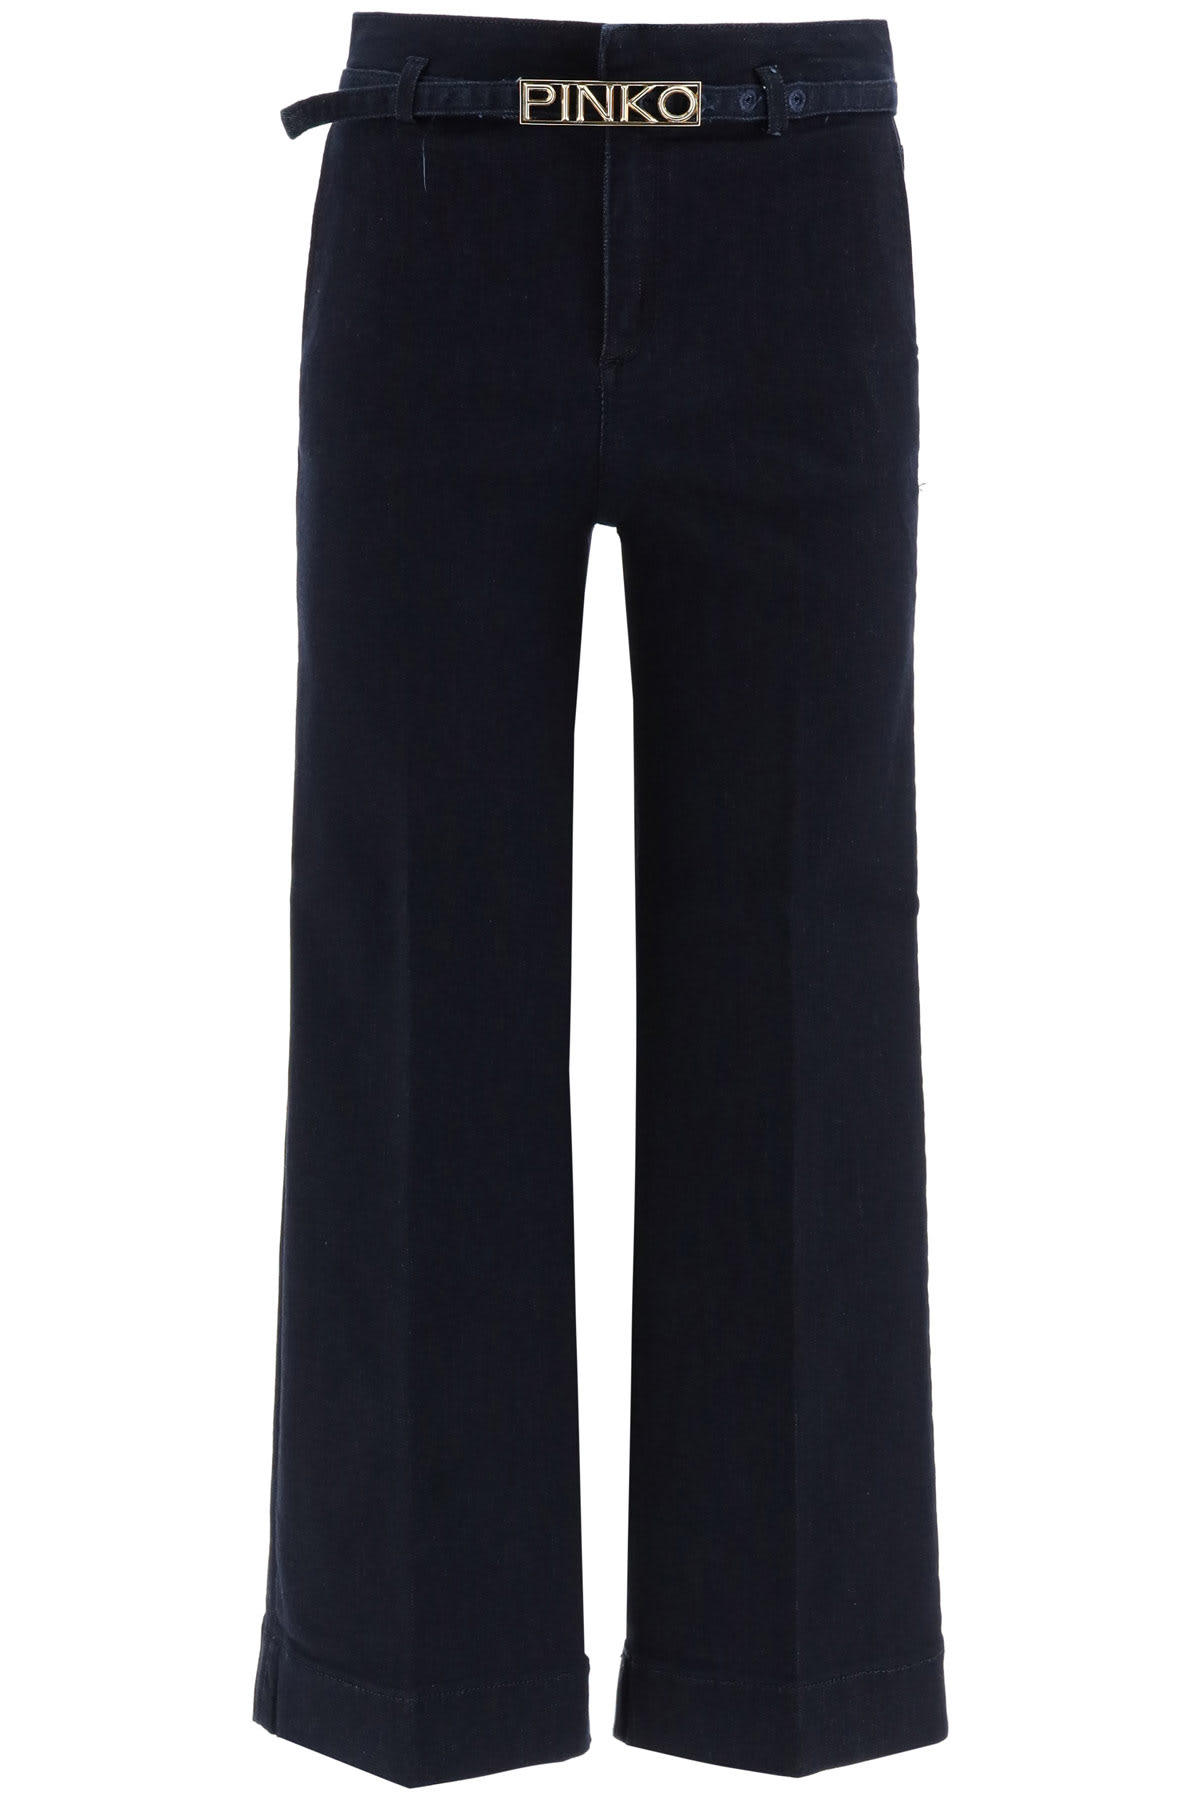 PINKO PEGGY CULOTTE JEANS,11516961